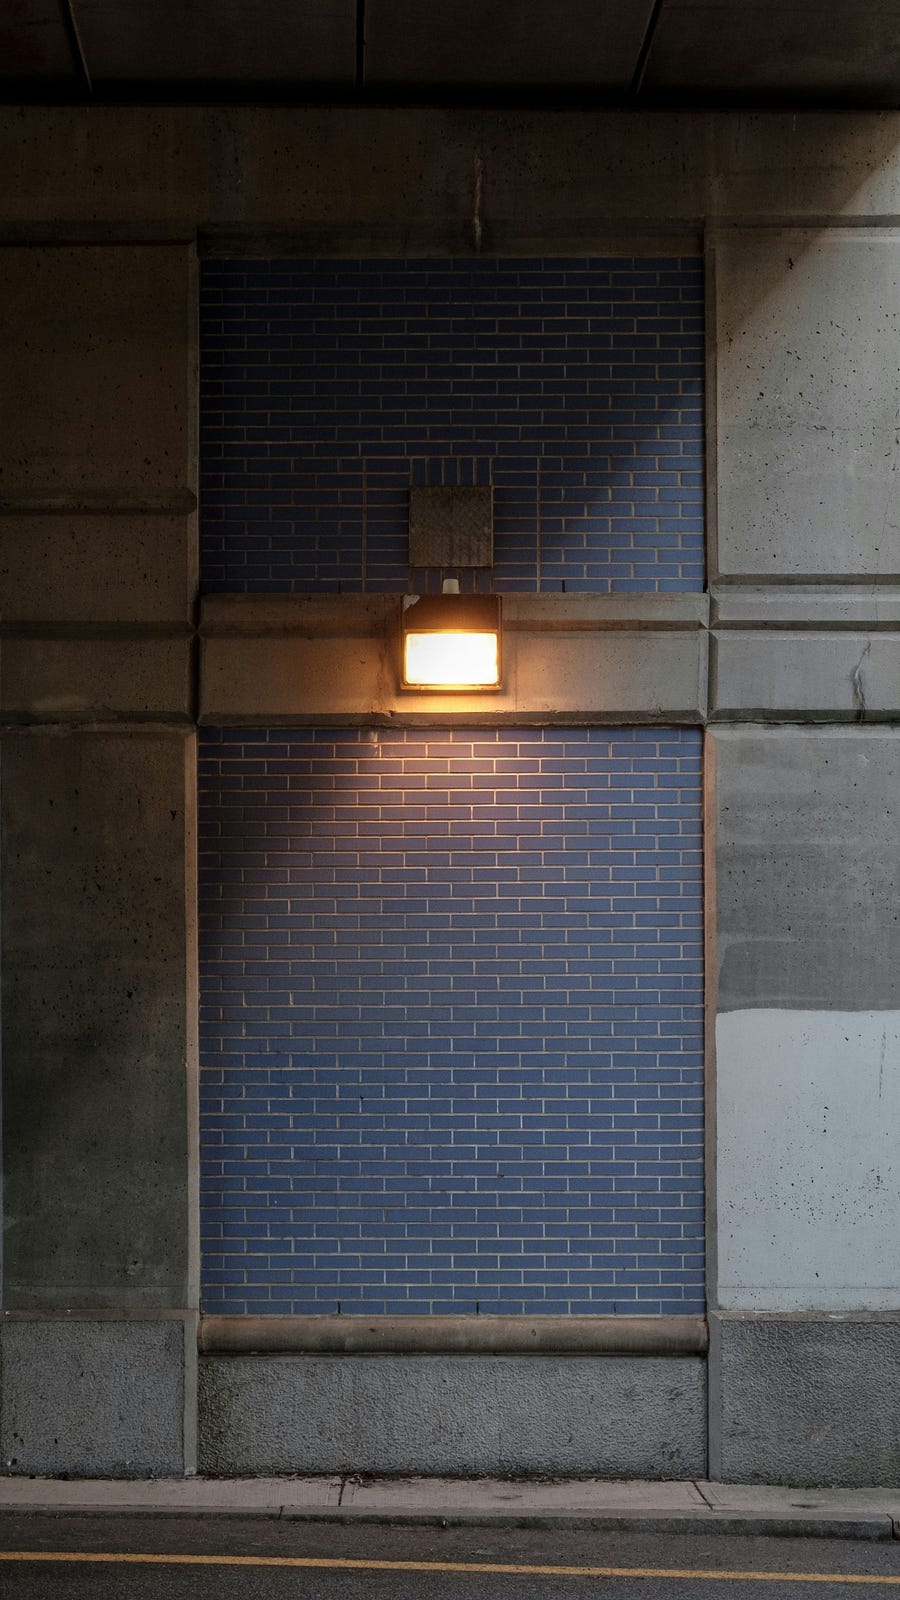 Image of walls and a square light.